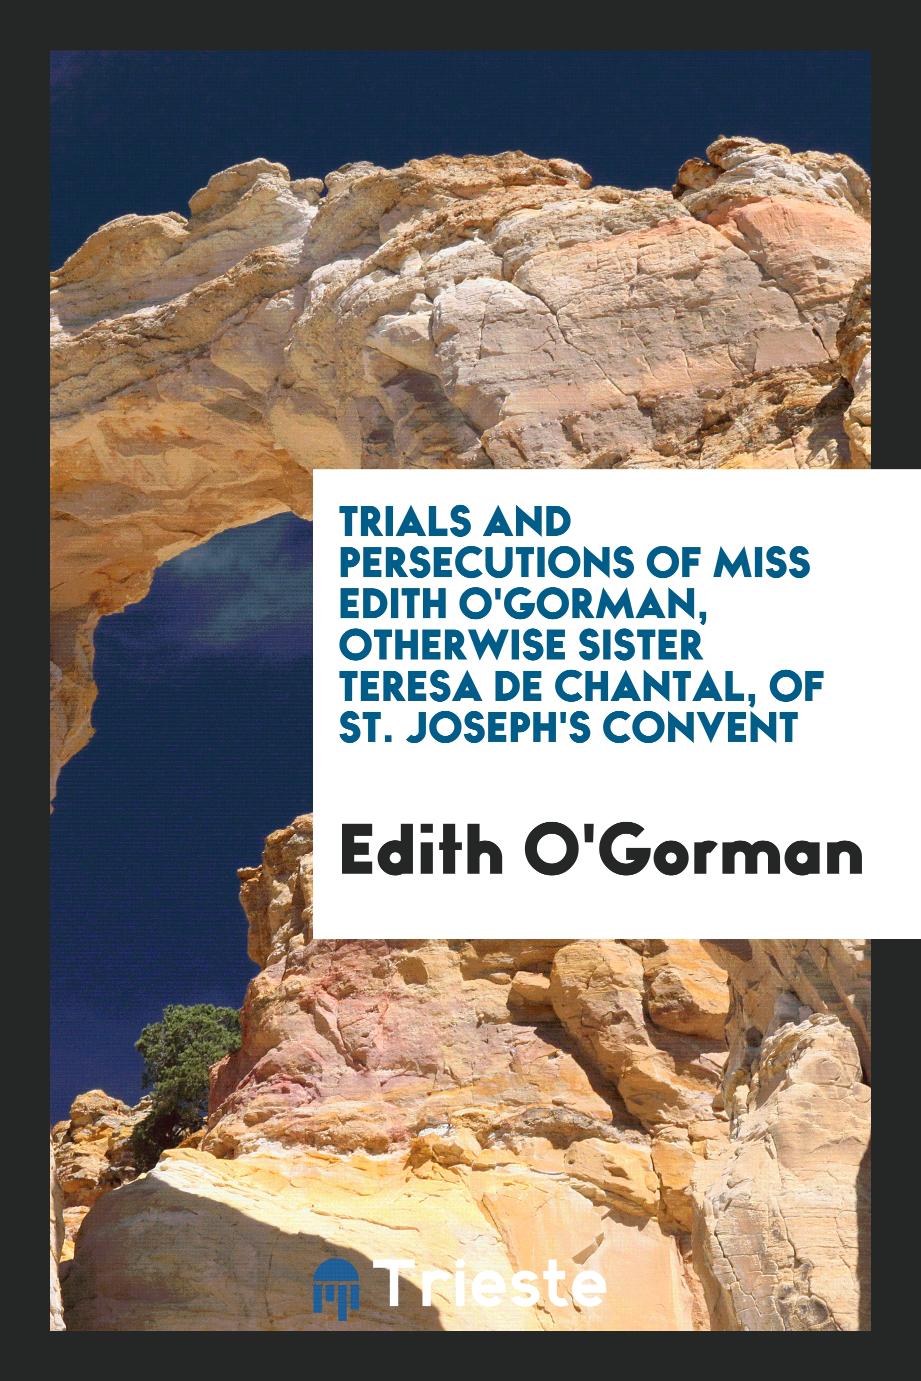 Trials and persecutions of Miss Edith O'Gorman, otherwise sister Teresa de Chantal, of St. Joseph's Convent